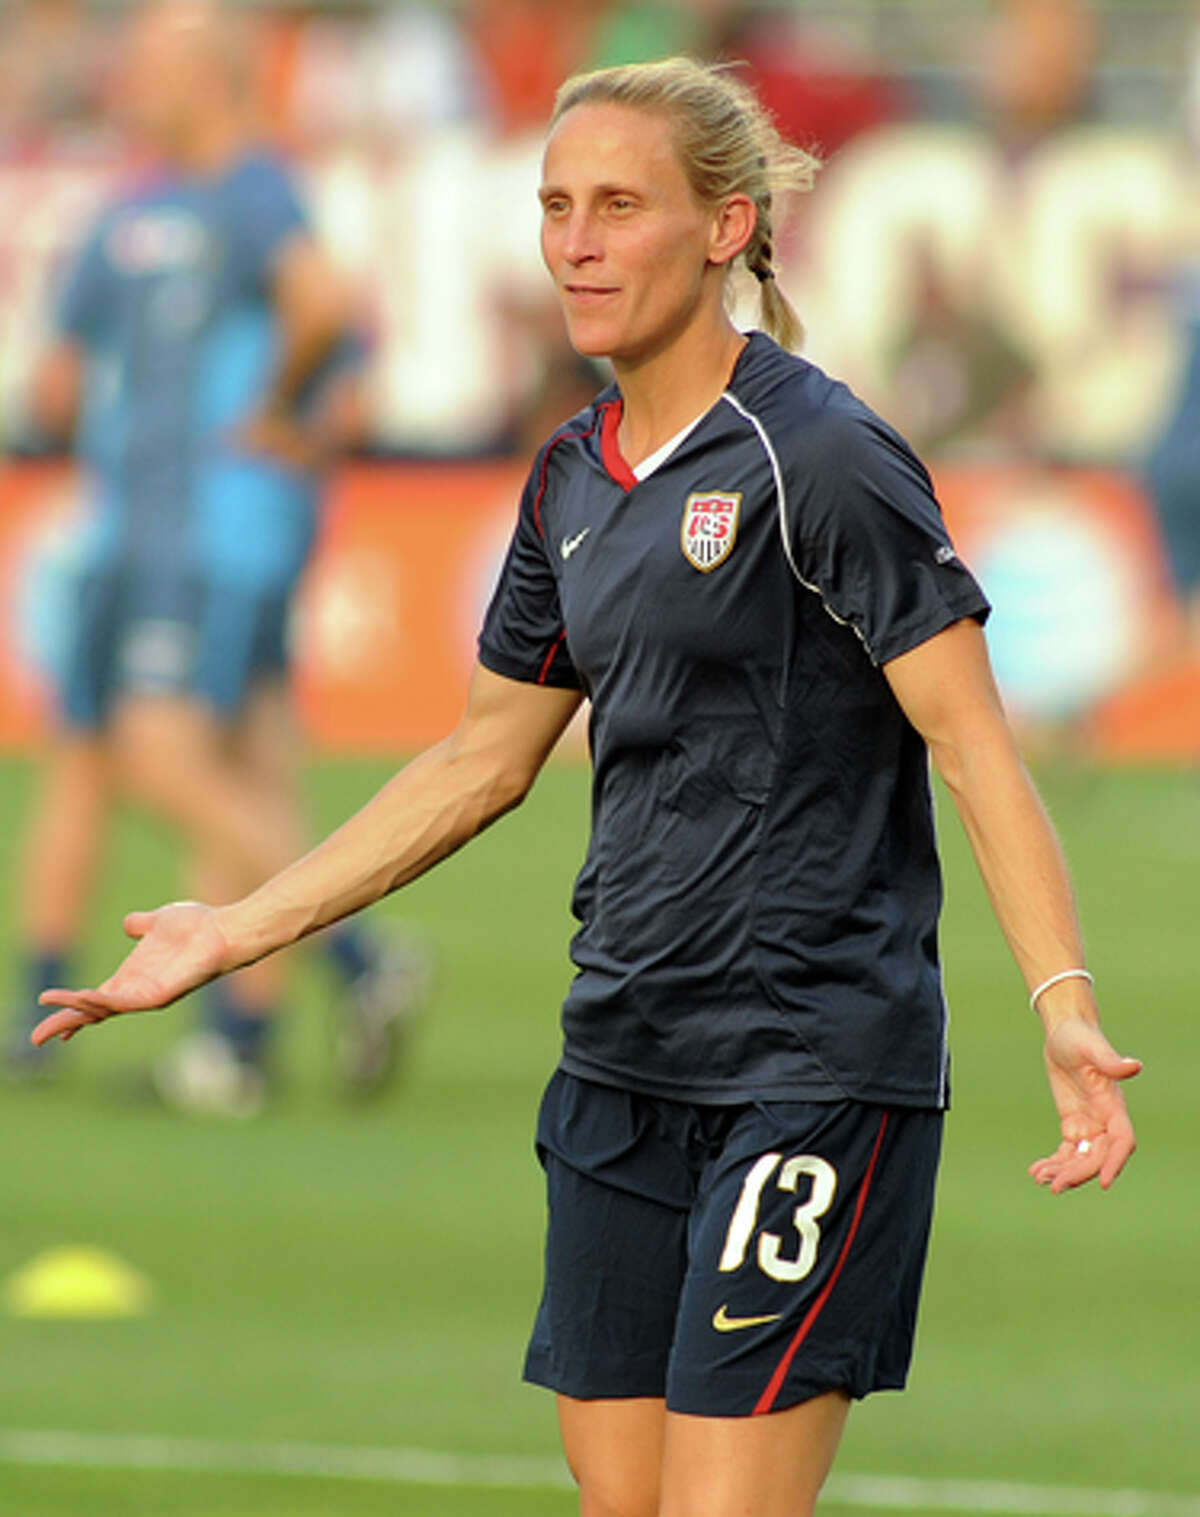 Kristine Lilly's coming home again to play soccer